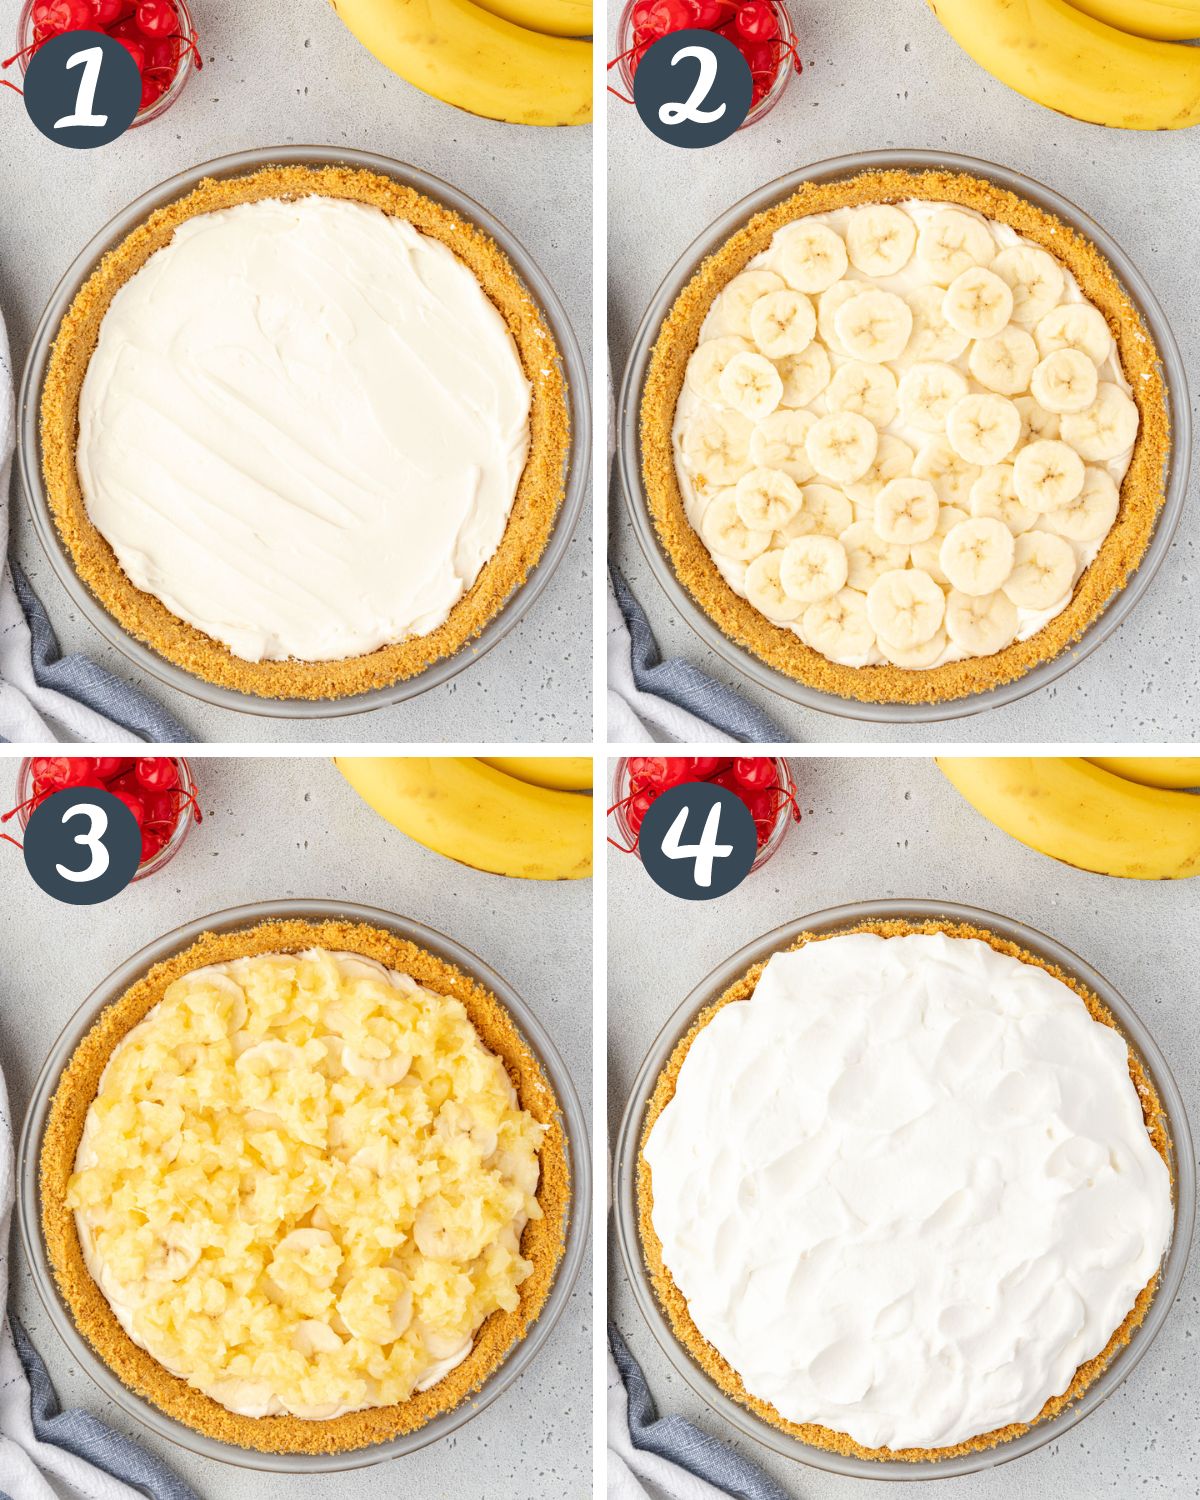 Collage showing each of the 4 layers of the pie.